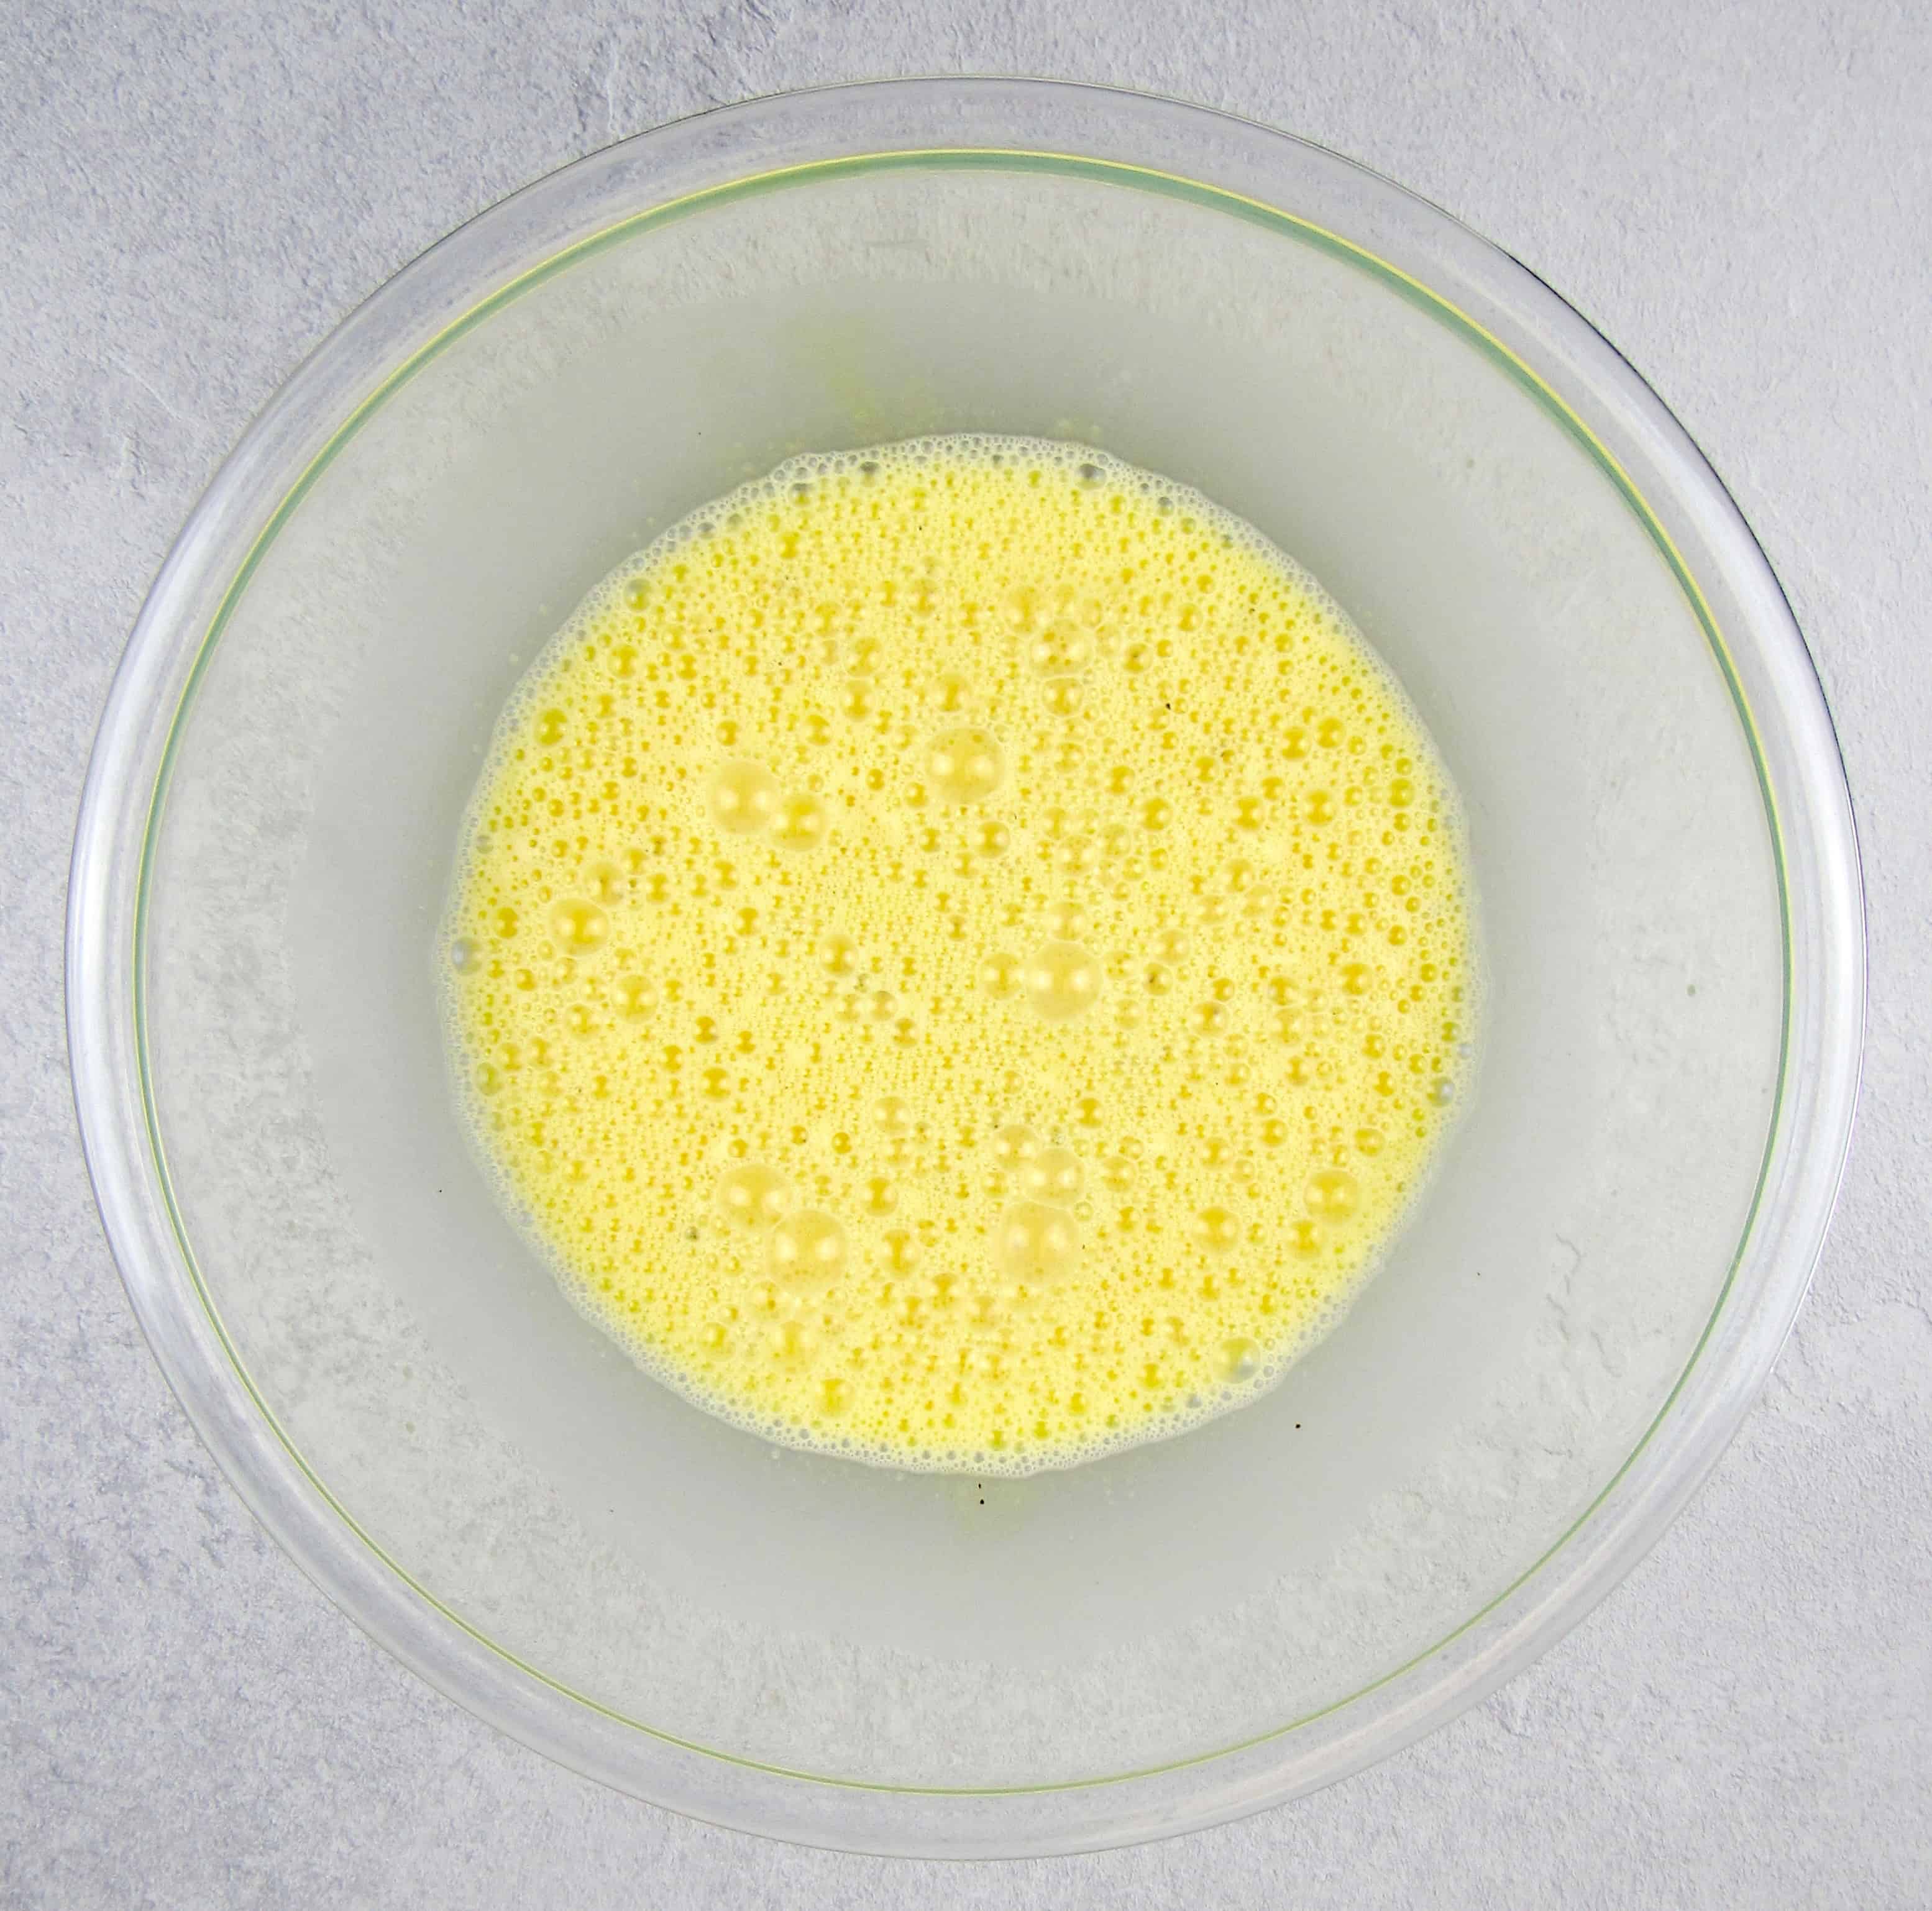 uncooked scrambled eggs in glass mixing bowl